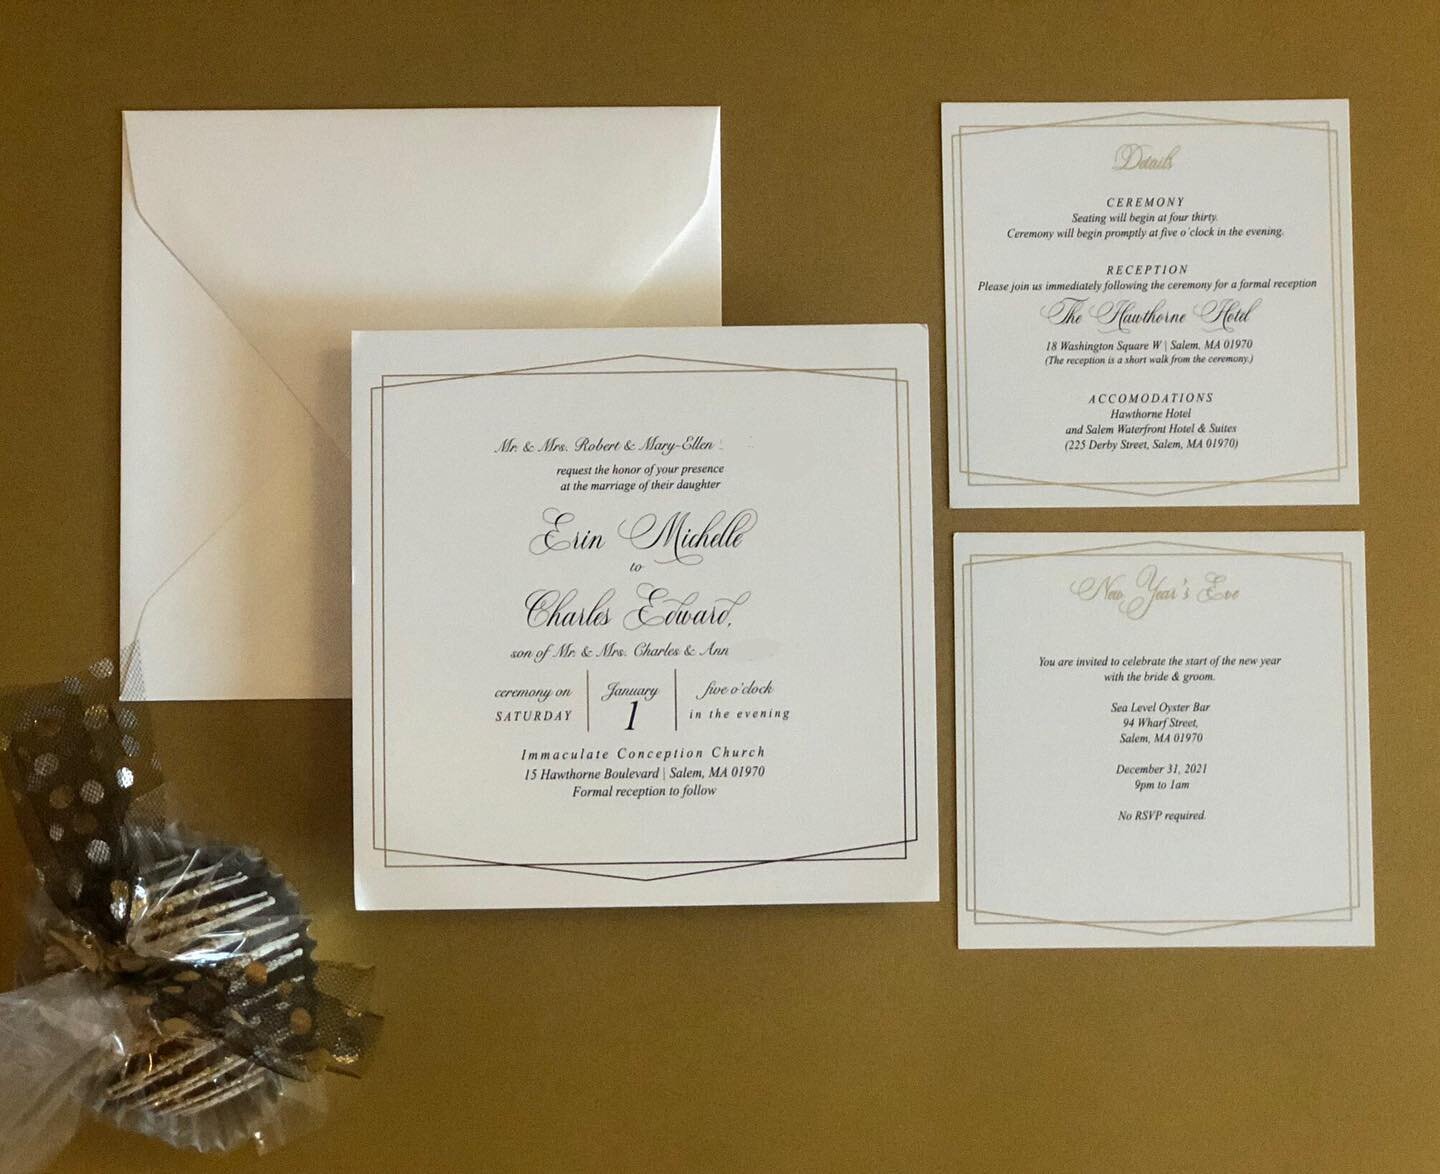 Gold foil with a script font lends a beautiful accent to a New Years Day wedding! We were so happy to work with this amazing couple on their wedding announcements and invitation suite! 

(Last names removed for privacy)

#foil #gold #invitation #wedd